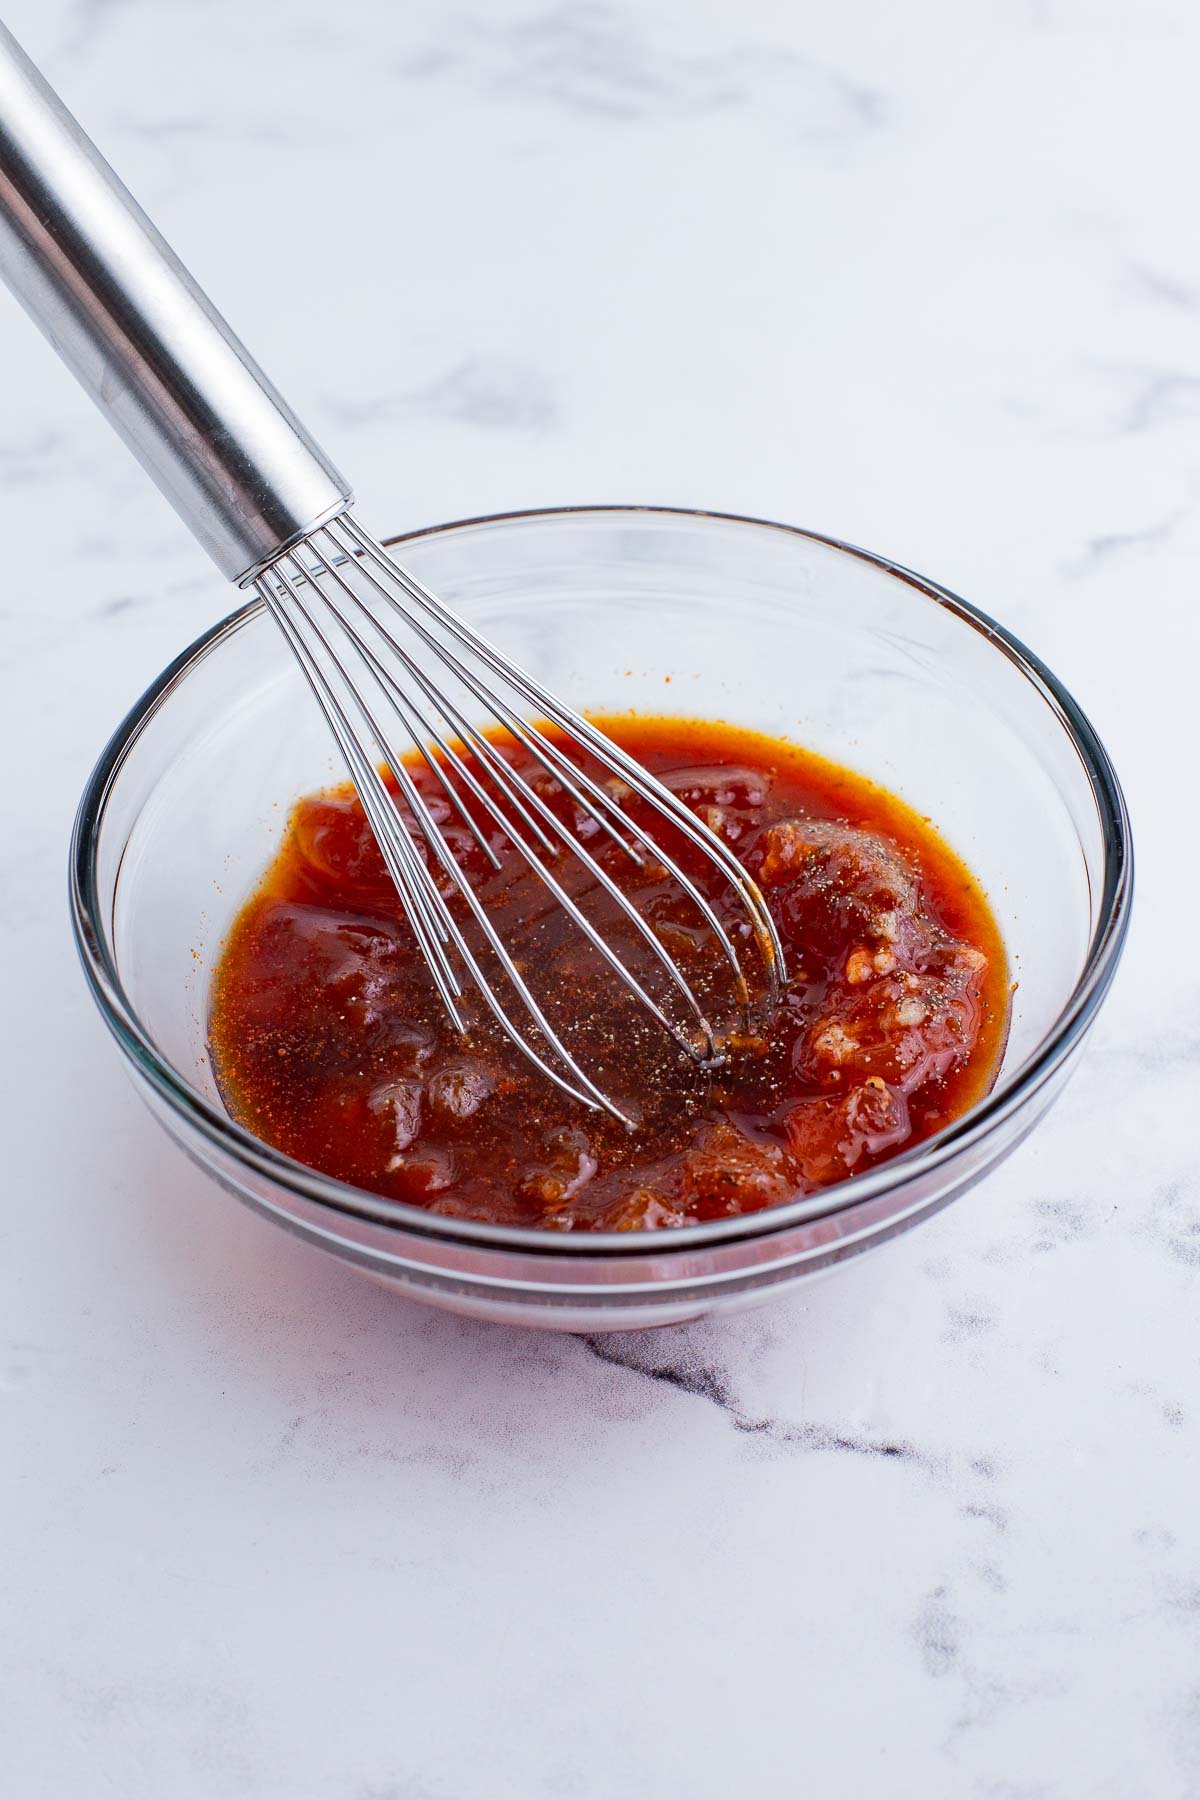 The sauce ingredients are mixed together in a glass bowl.